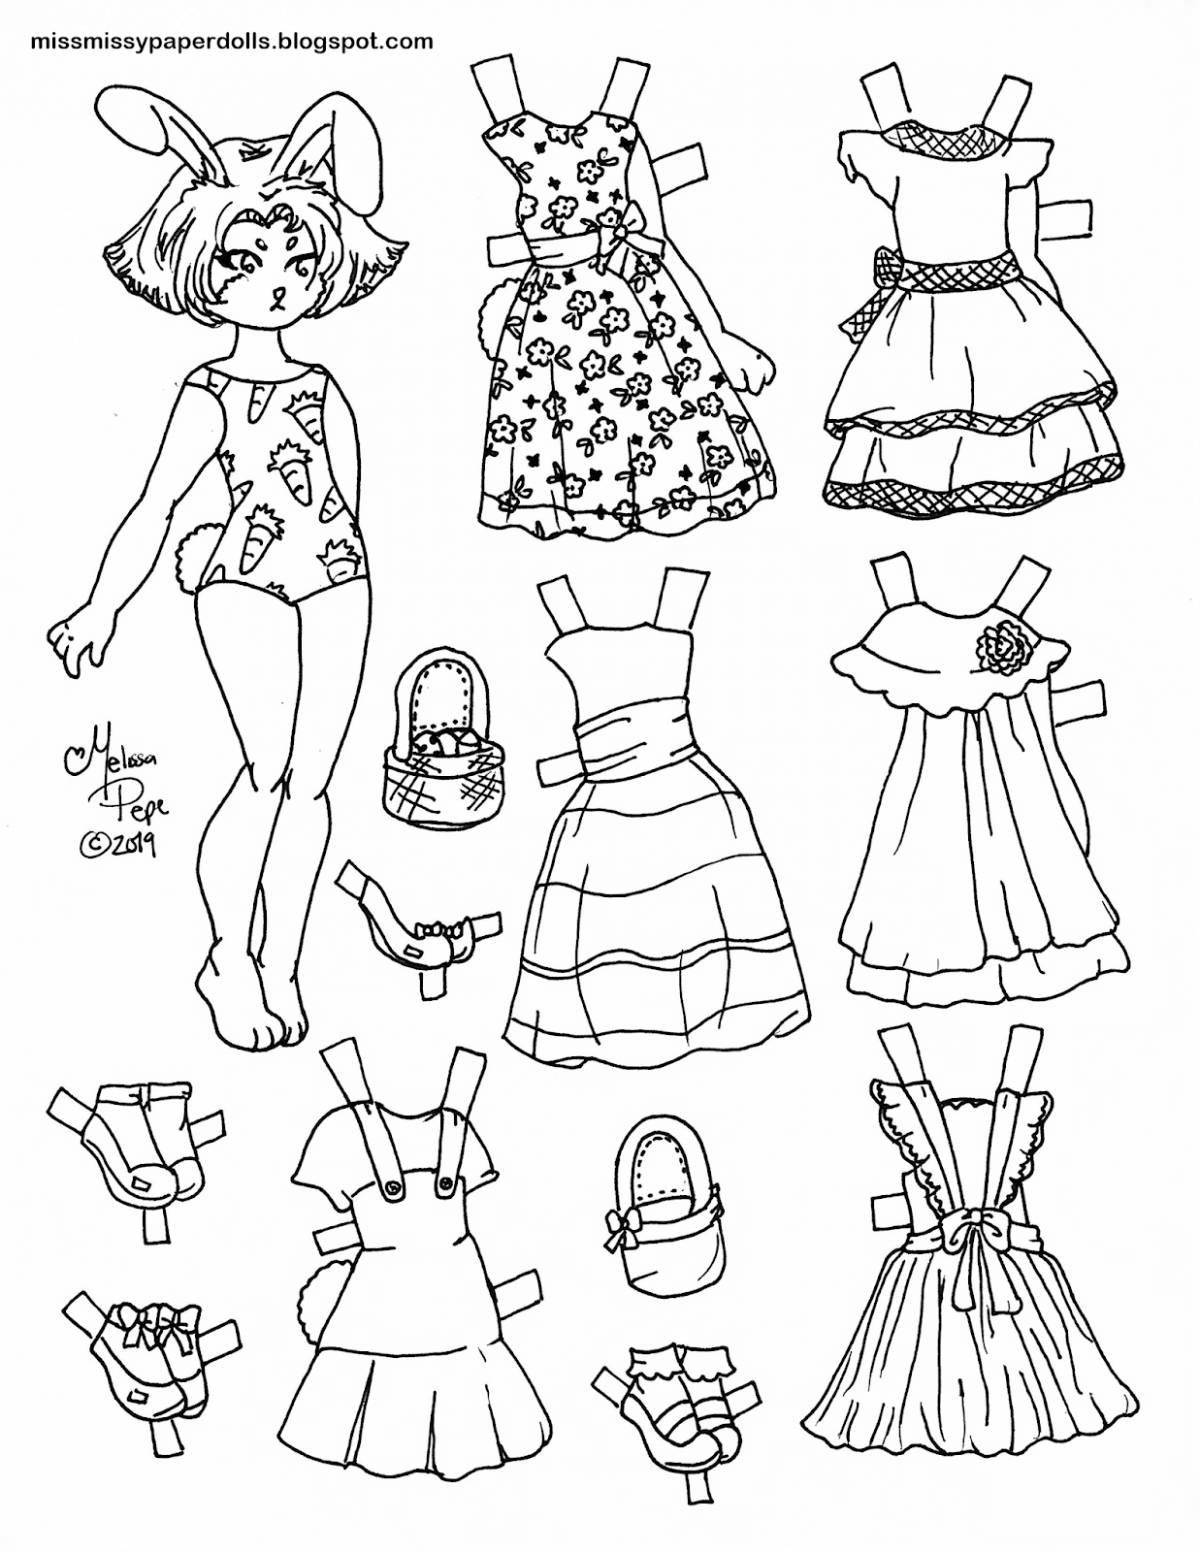 Lalafan duck with clothes playful coloring page